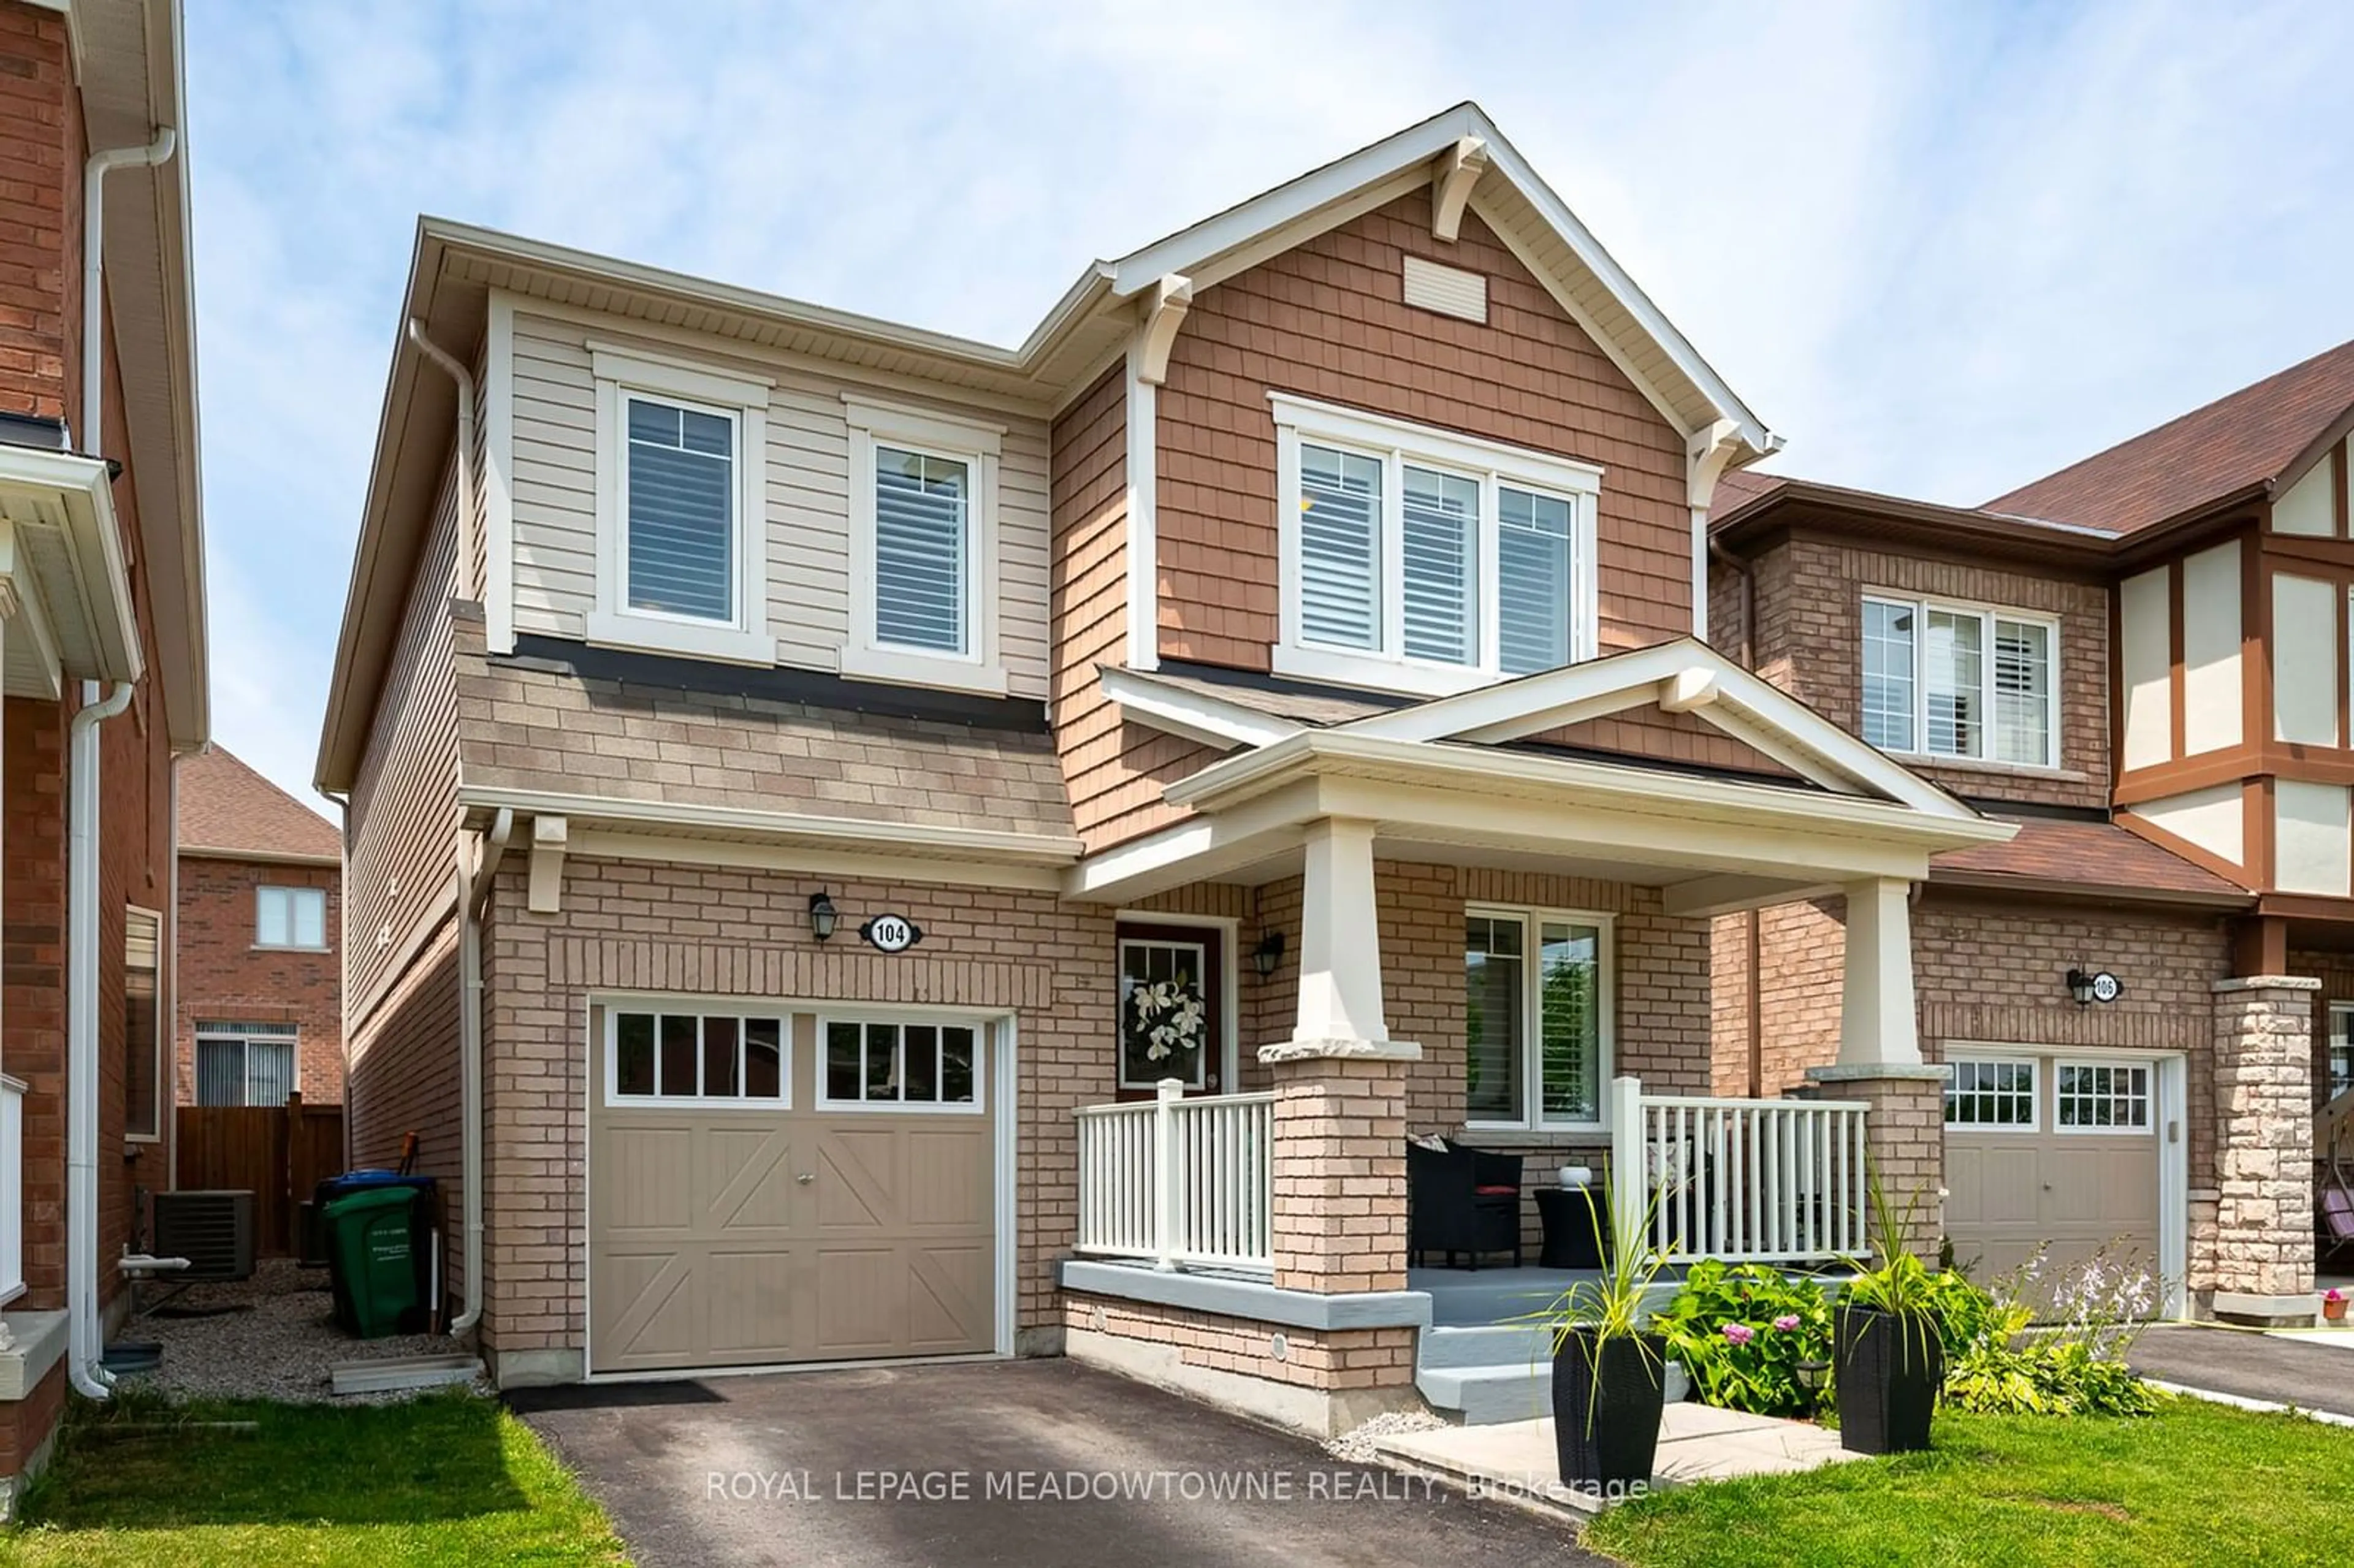 Home with brick exterior material for 104 Stedford Cres, Brampton Ontario L7A 4P7